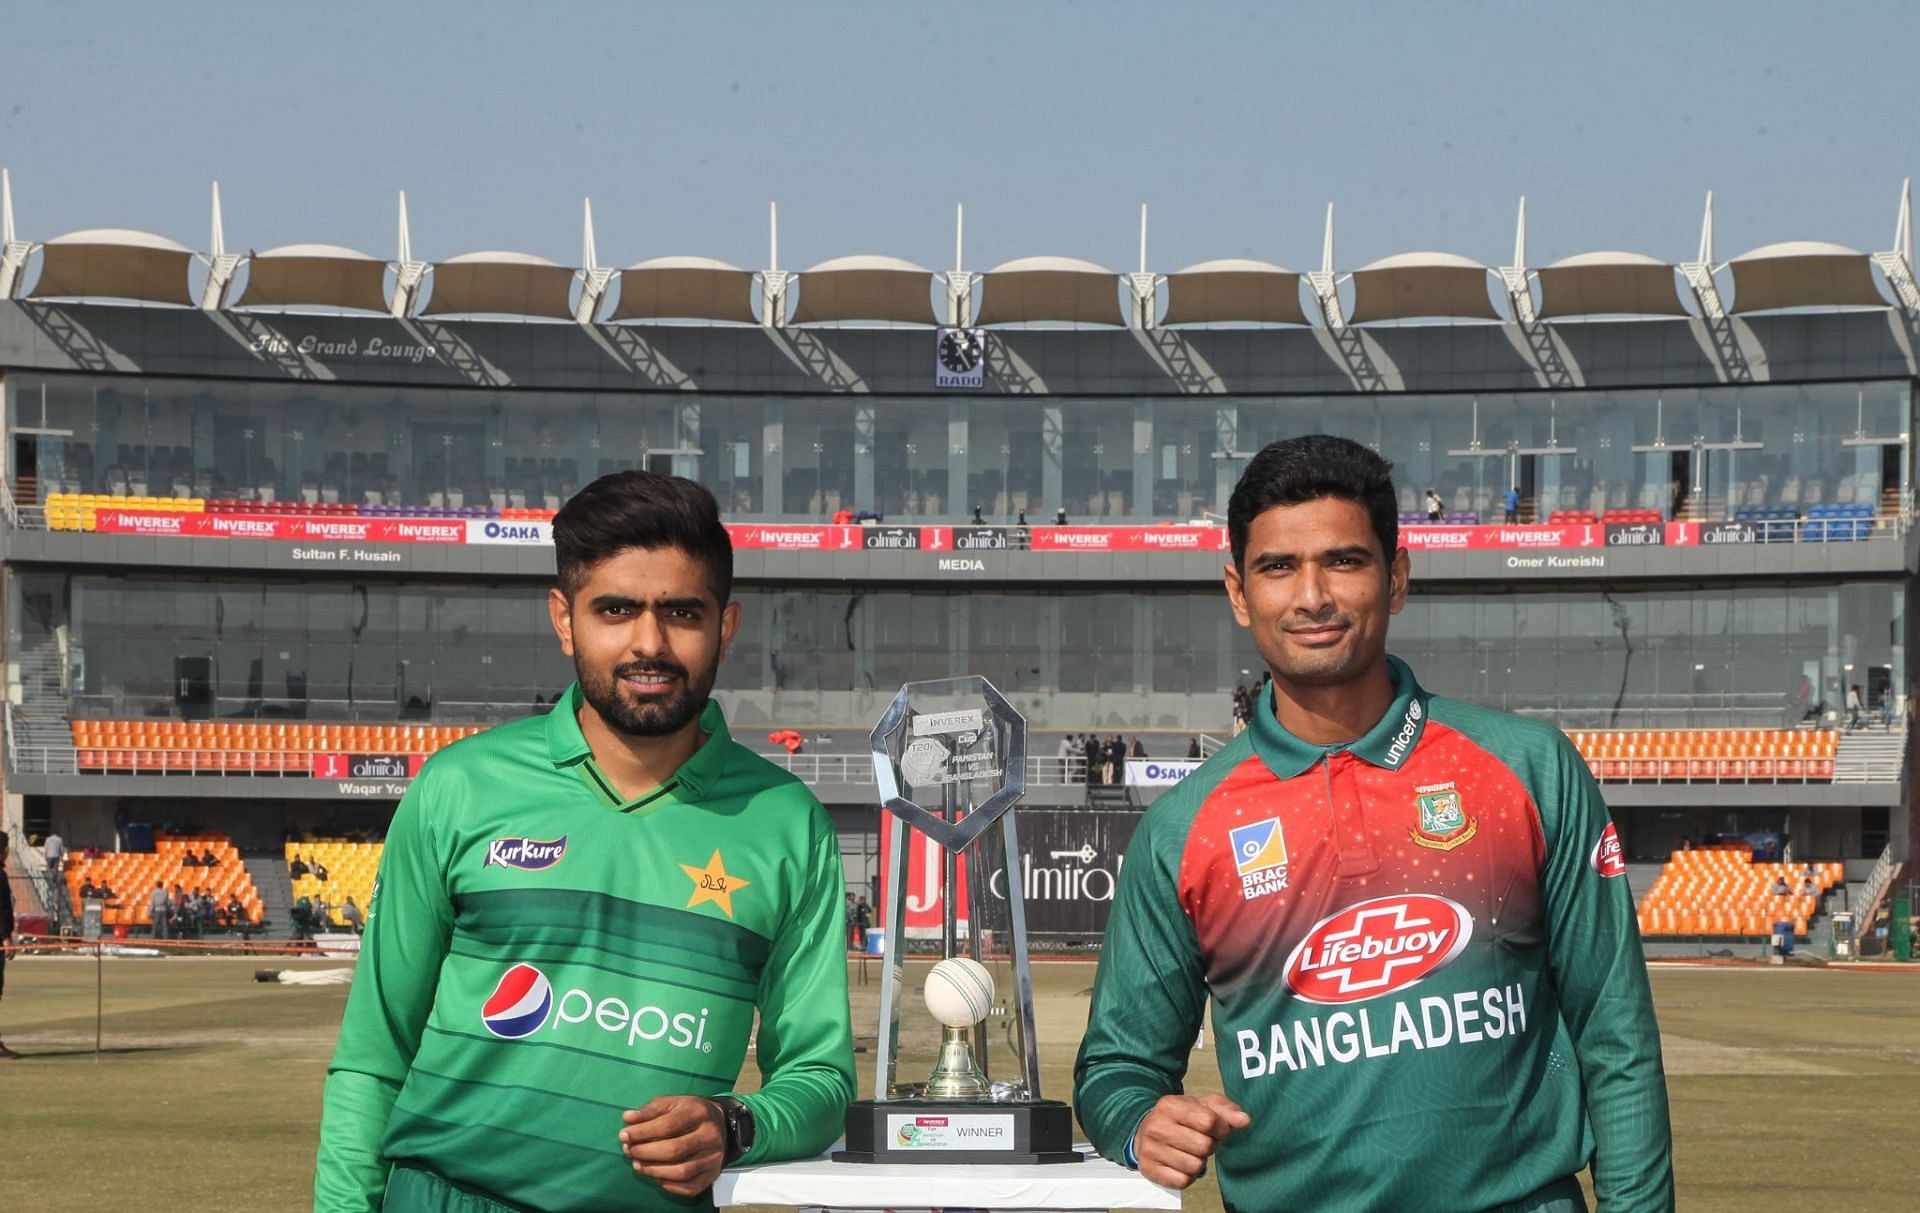 Bangladesh and Pakistan will go head-to-head against each other tomorrow.